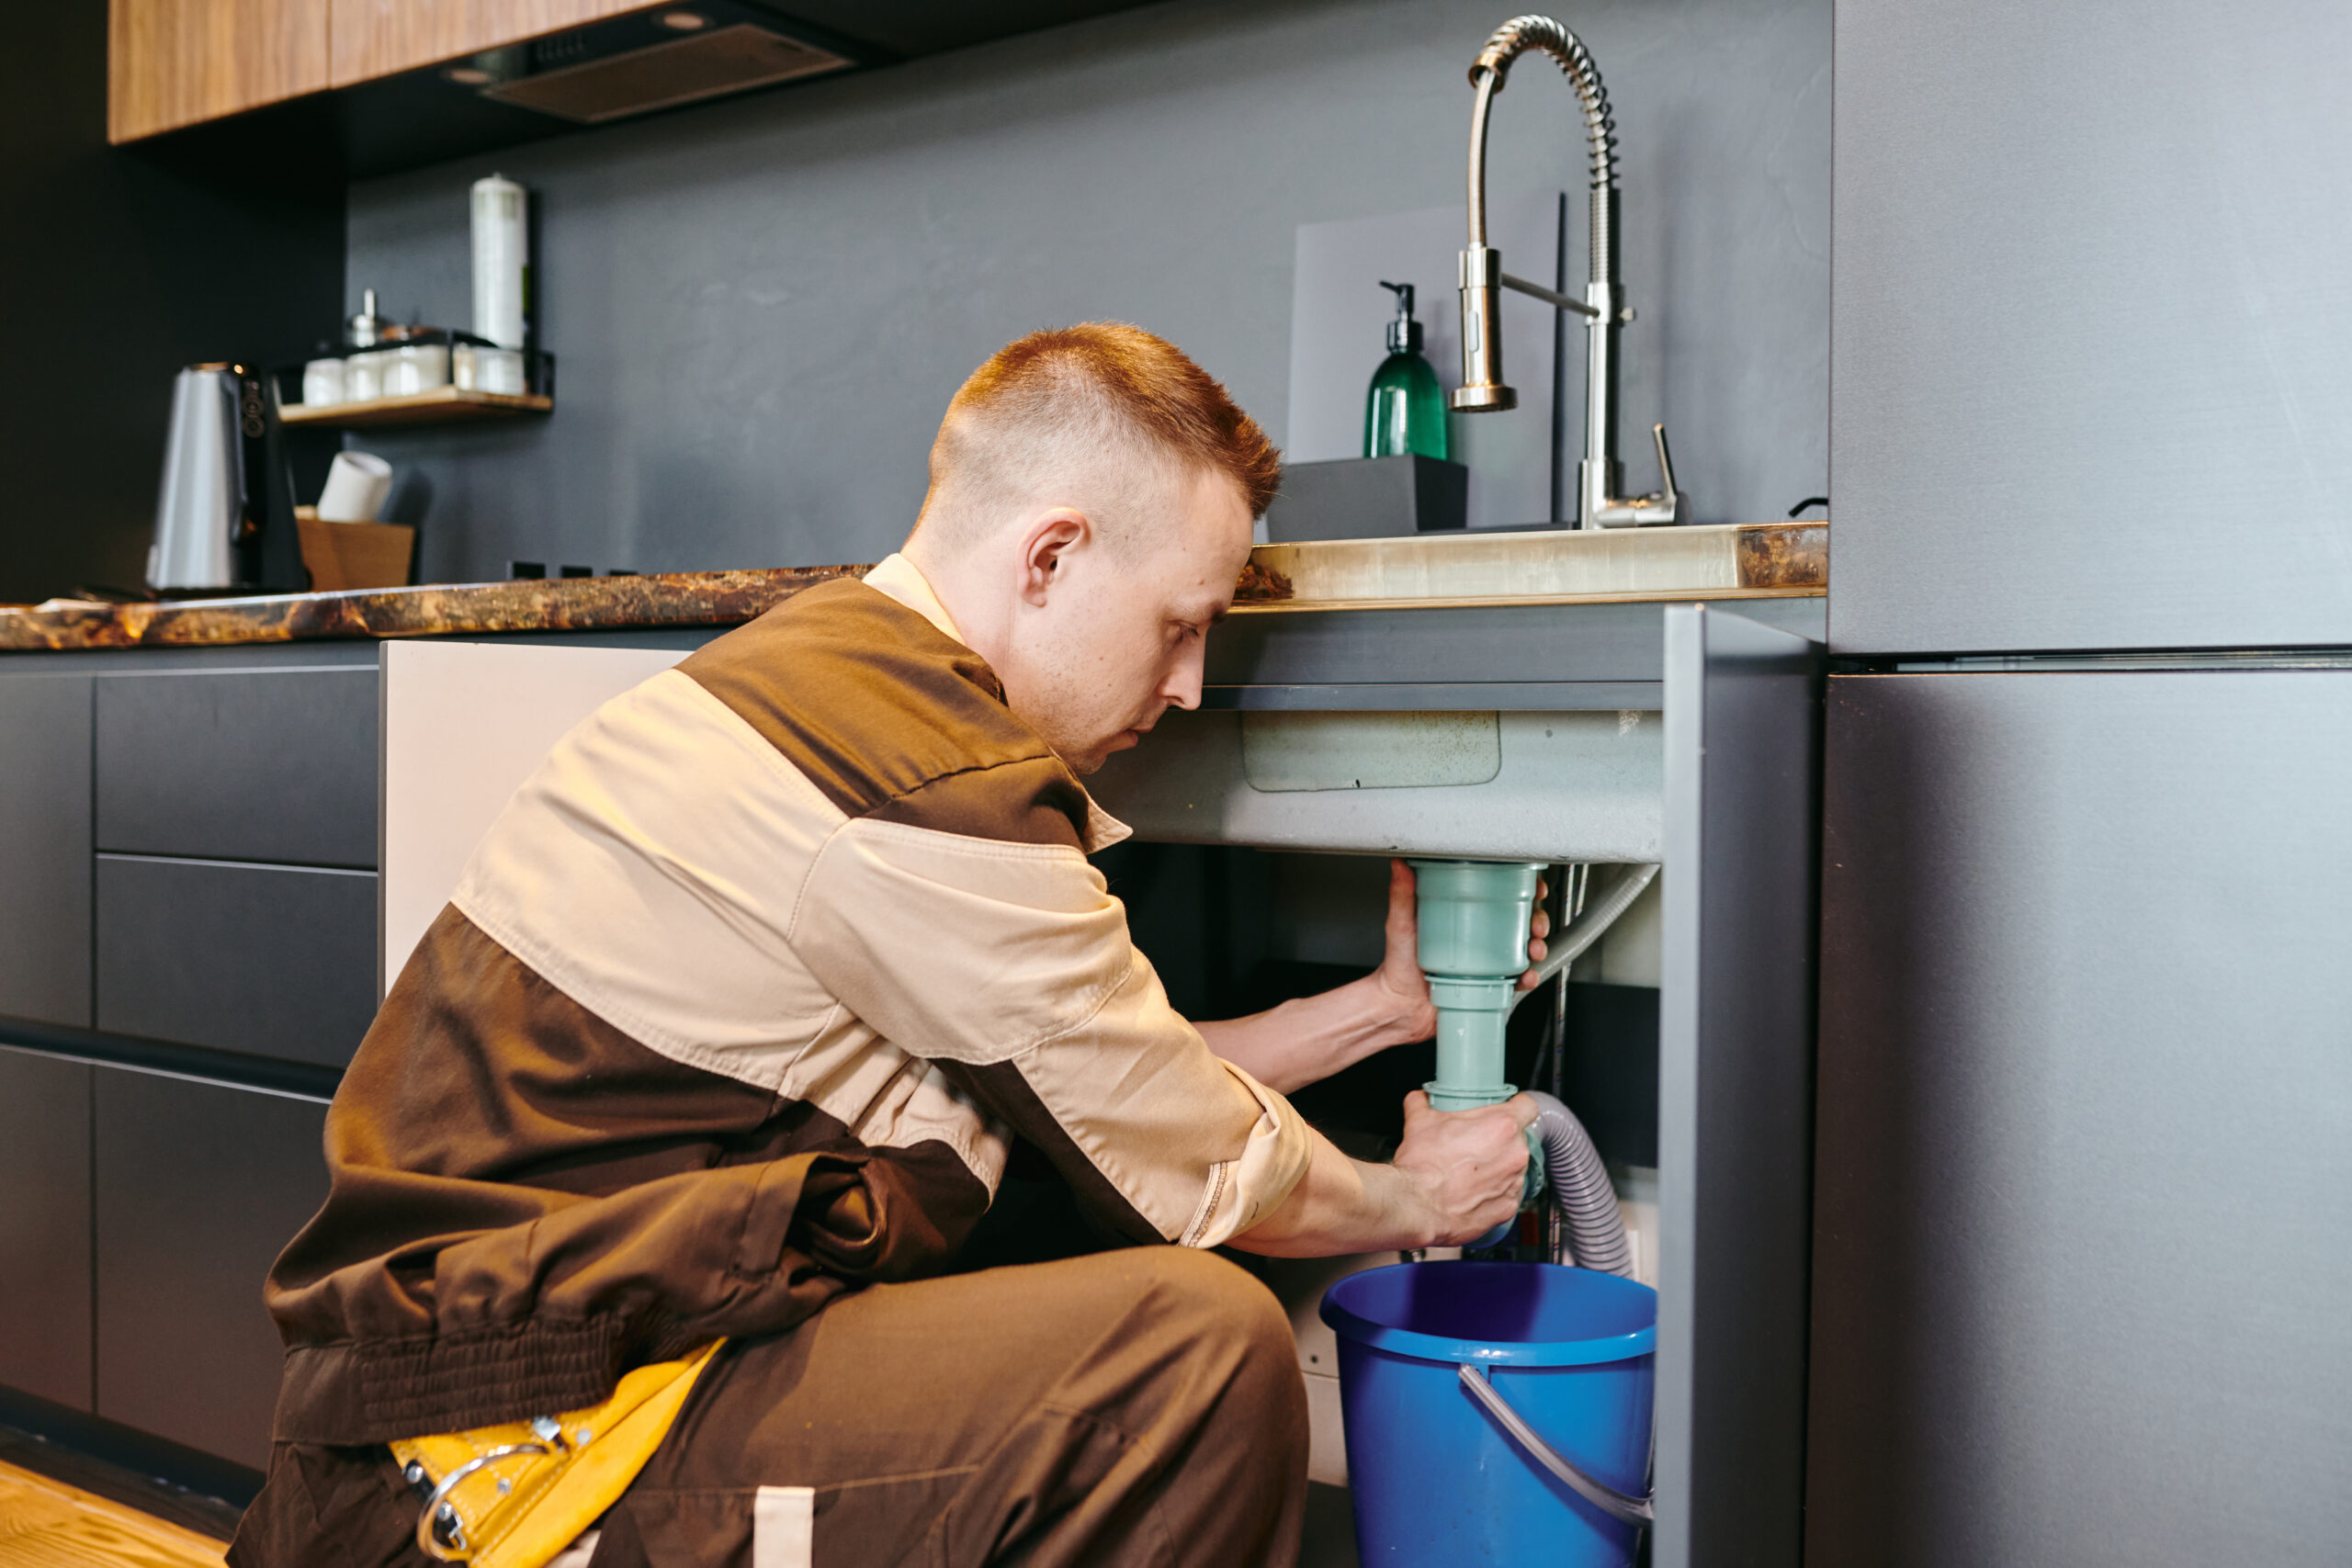 https://www.eagleservicecompany.com/wp-content/uploads/2023/12/a-man-in-uniform-checking-plumbing-equipment-after-2023-11-27-05-14-25-utc-scaled.jpg